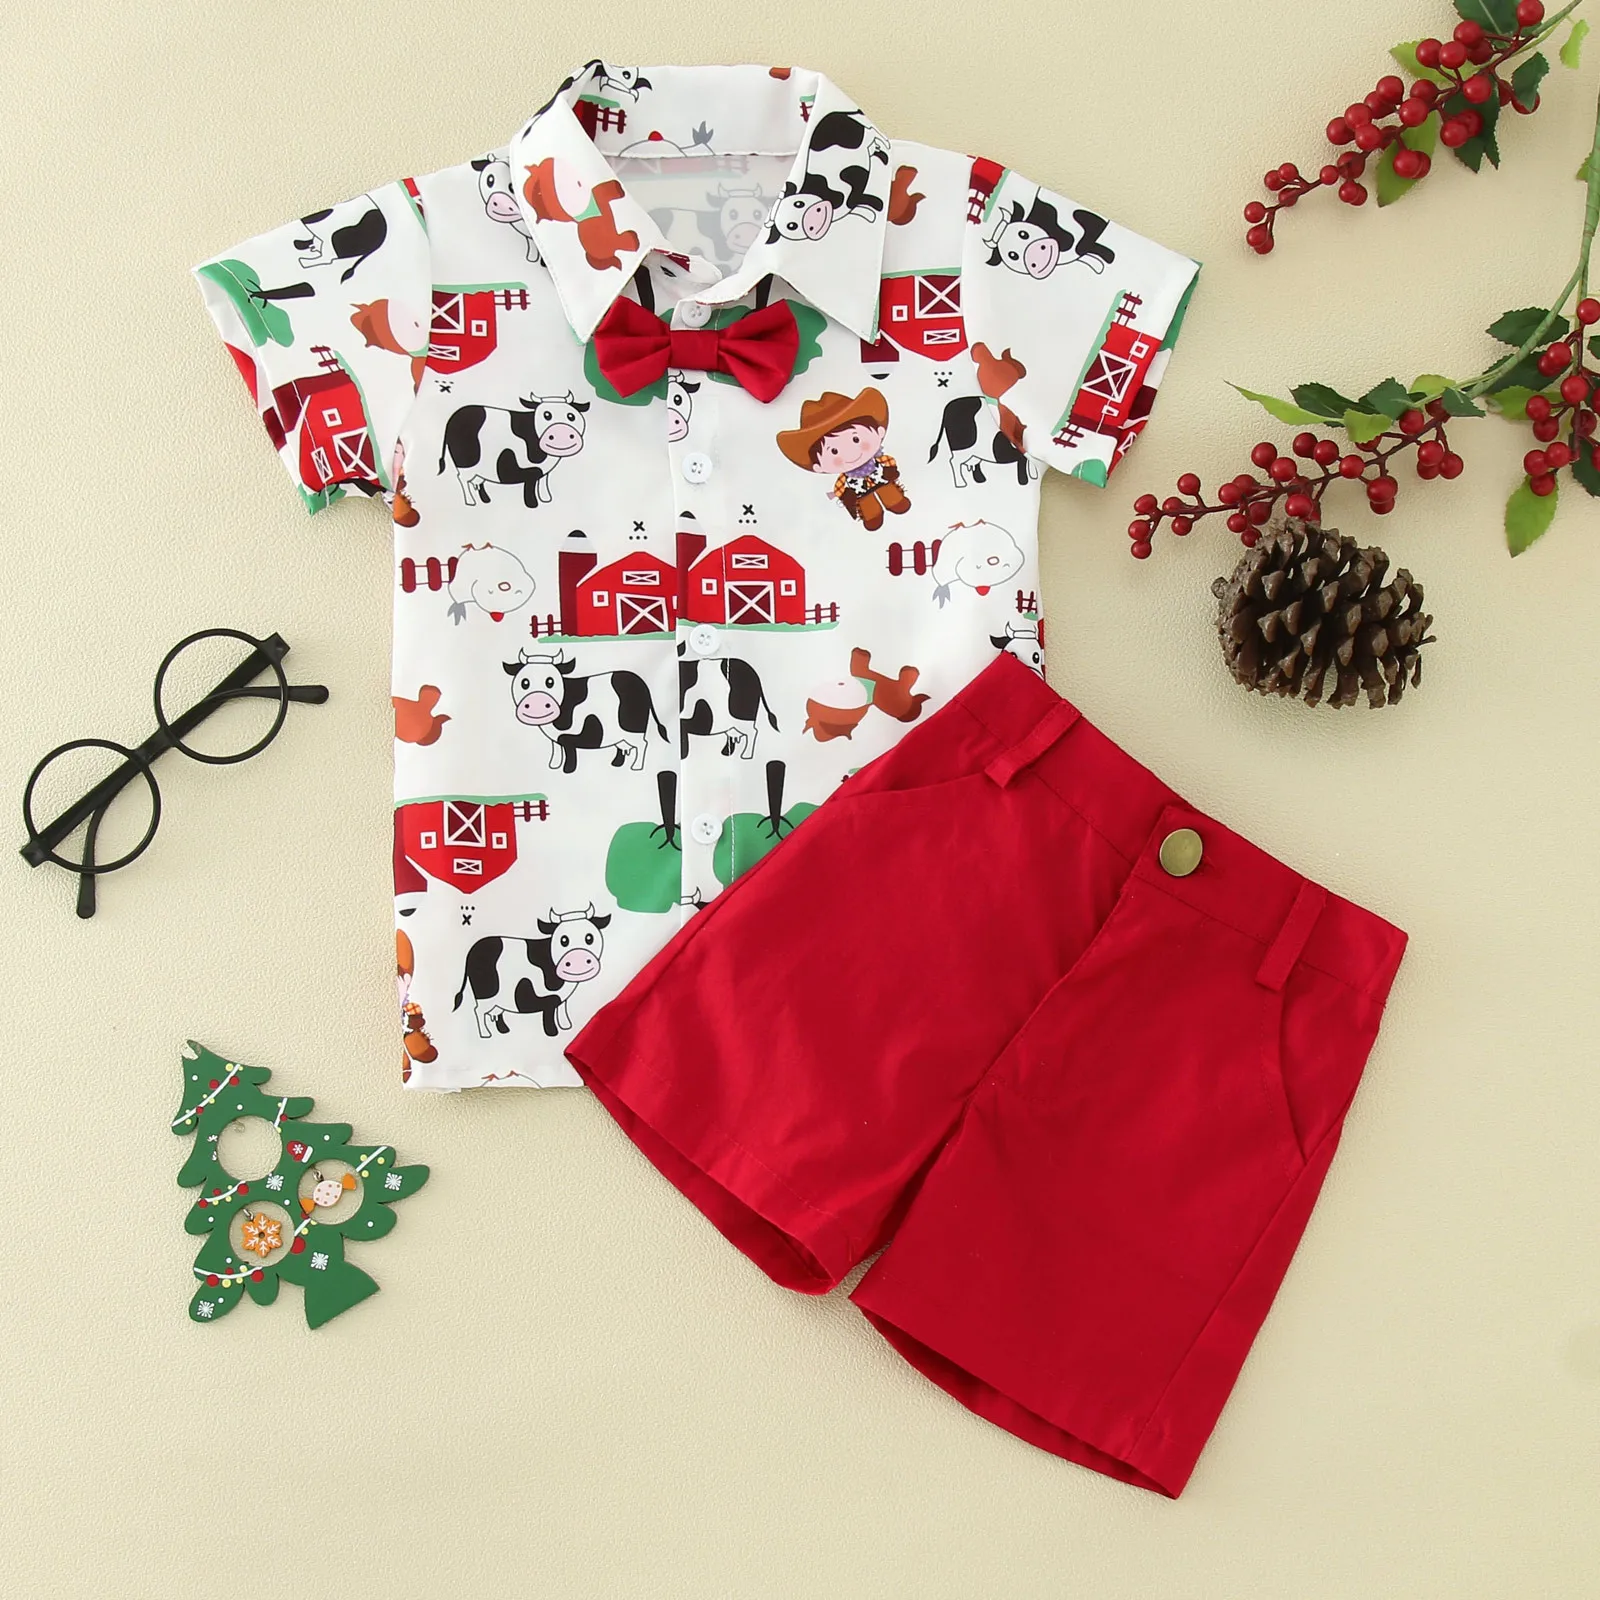 Toddler Boys Clothes Sets Cartoon Dairy Cow Prints Short Sleeve T Shirts+Shorts 2 Piece Sets Child Gentleman Outfits 1-5 Years